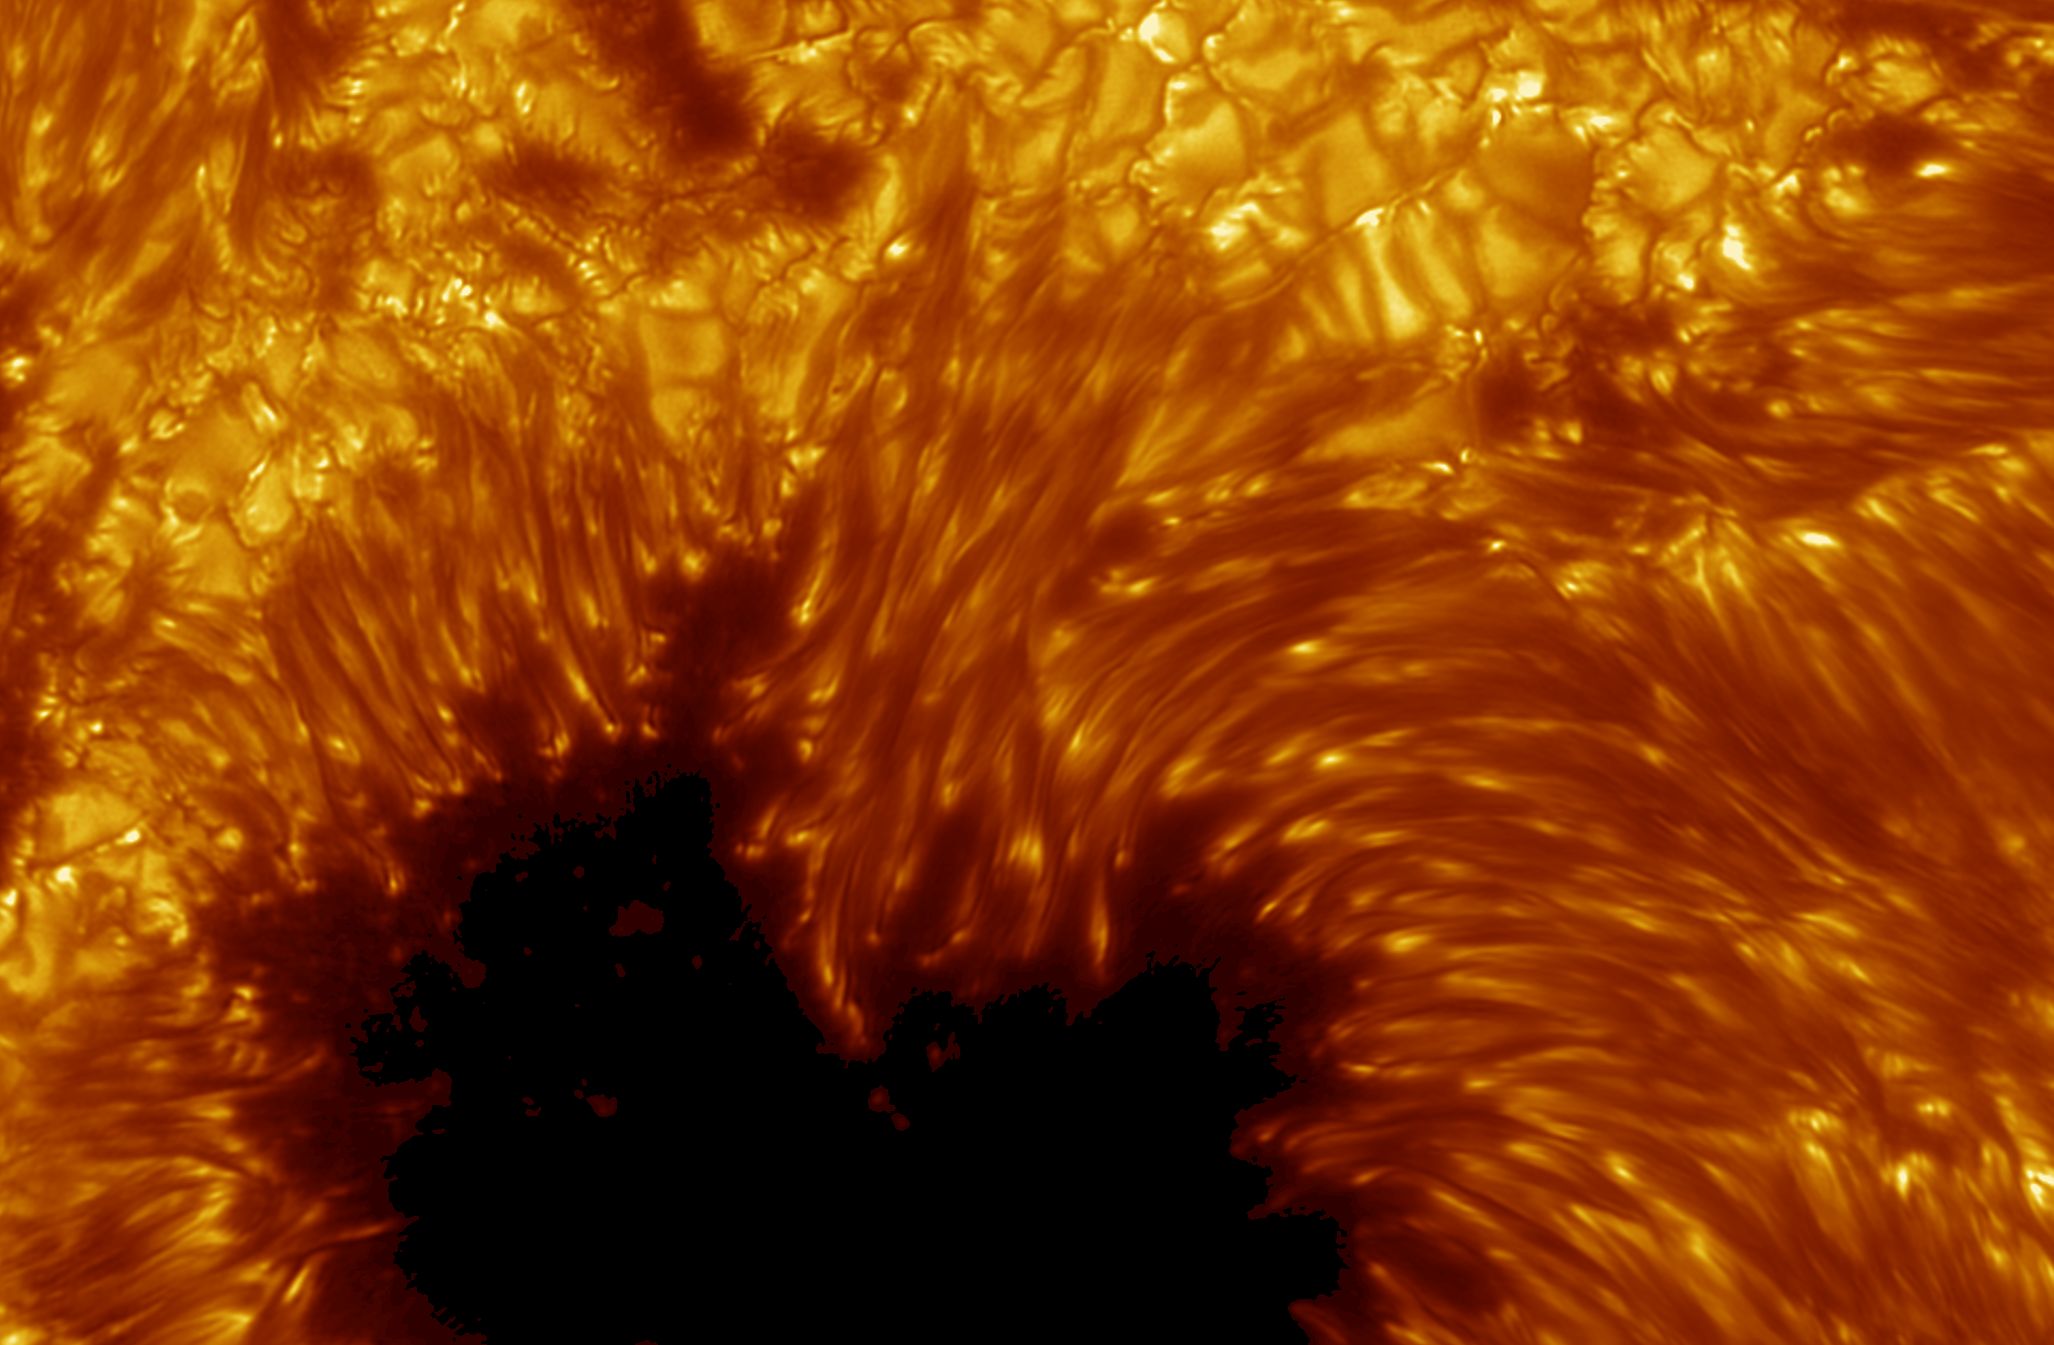 The Sharpest View of the Sun